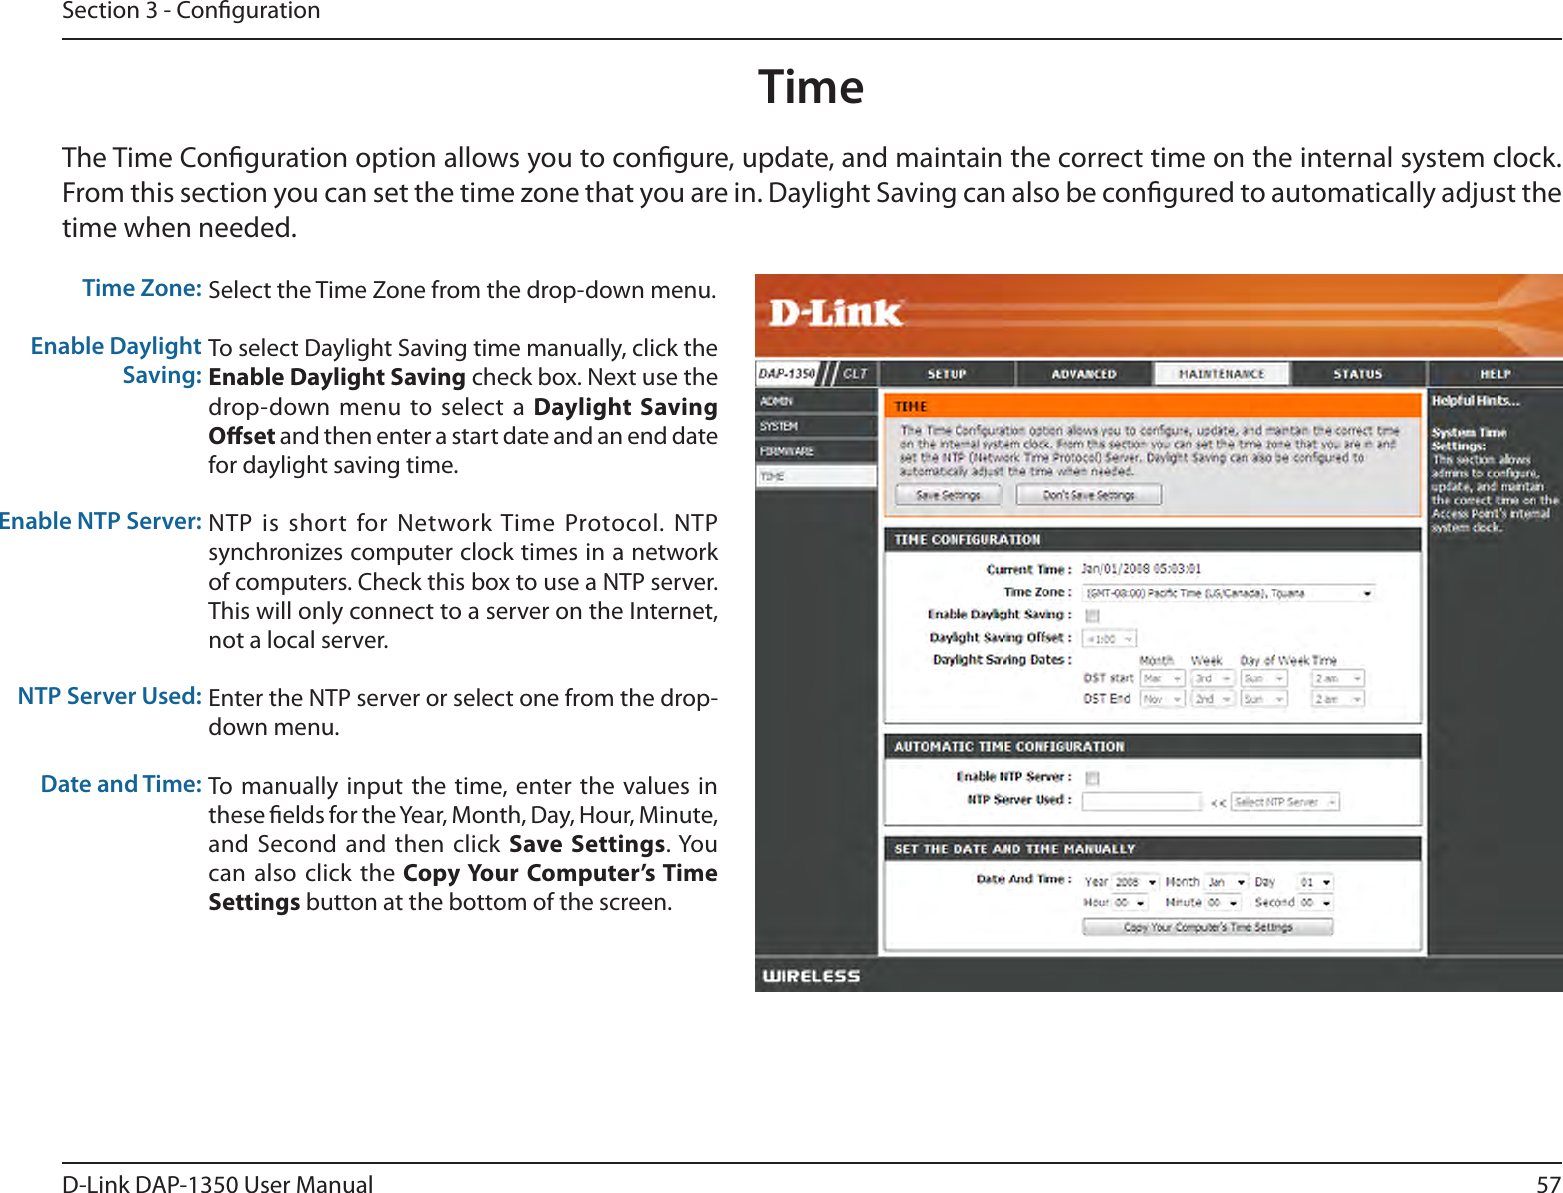 57D-Link DAP-1350 User ManualSection 3 - CongurationTime Zone:Enable Daylight Saving:Enable NTP Server:NTP Server Used:Date and Time:Select the Time Zone from the drop-down menu.To select Daylight Saving time manually, click the Enable Daylight Saving check box. Next use the drop-down menu  to select a  Daylight Saving Oset and then enter a start date and an end date for daylight saving time.NTP is  short for Network Time Protocol. NTP synchronizes computer clock times in a network of computers. Check this box to use a NTP server. This will only connect to a server on the Internet, not a local server.Enter the NTP server or select one from the drop-down menu.To  manually input the  time, enter the values  in these elds for the Year, Month, Day, Hour, Minute, and Second  and then  click  Save Settings. You can also  click the  Copy Your  Computer’s Time Settings button at the bottom of the screen.TimeThe Time Conguration option allows you to congure, update, and maintain the correct time on the internal system clock. From this section you can set the time zone that you are in. Daylight Saving can also be congured to automatically adjust the time when needed.